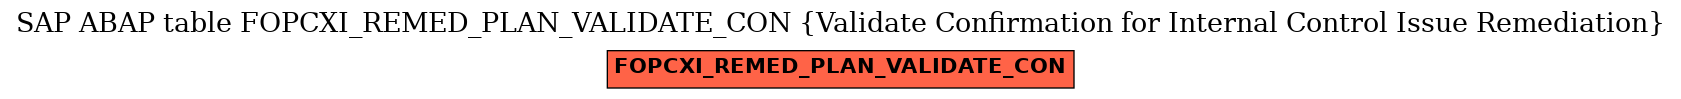 E-R Diagram for table FOPCXI_REMED_PLAN_VALIDATE_CON (Validate Confirmation for Internal Control Issue Remediation)